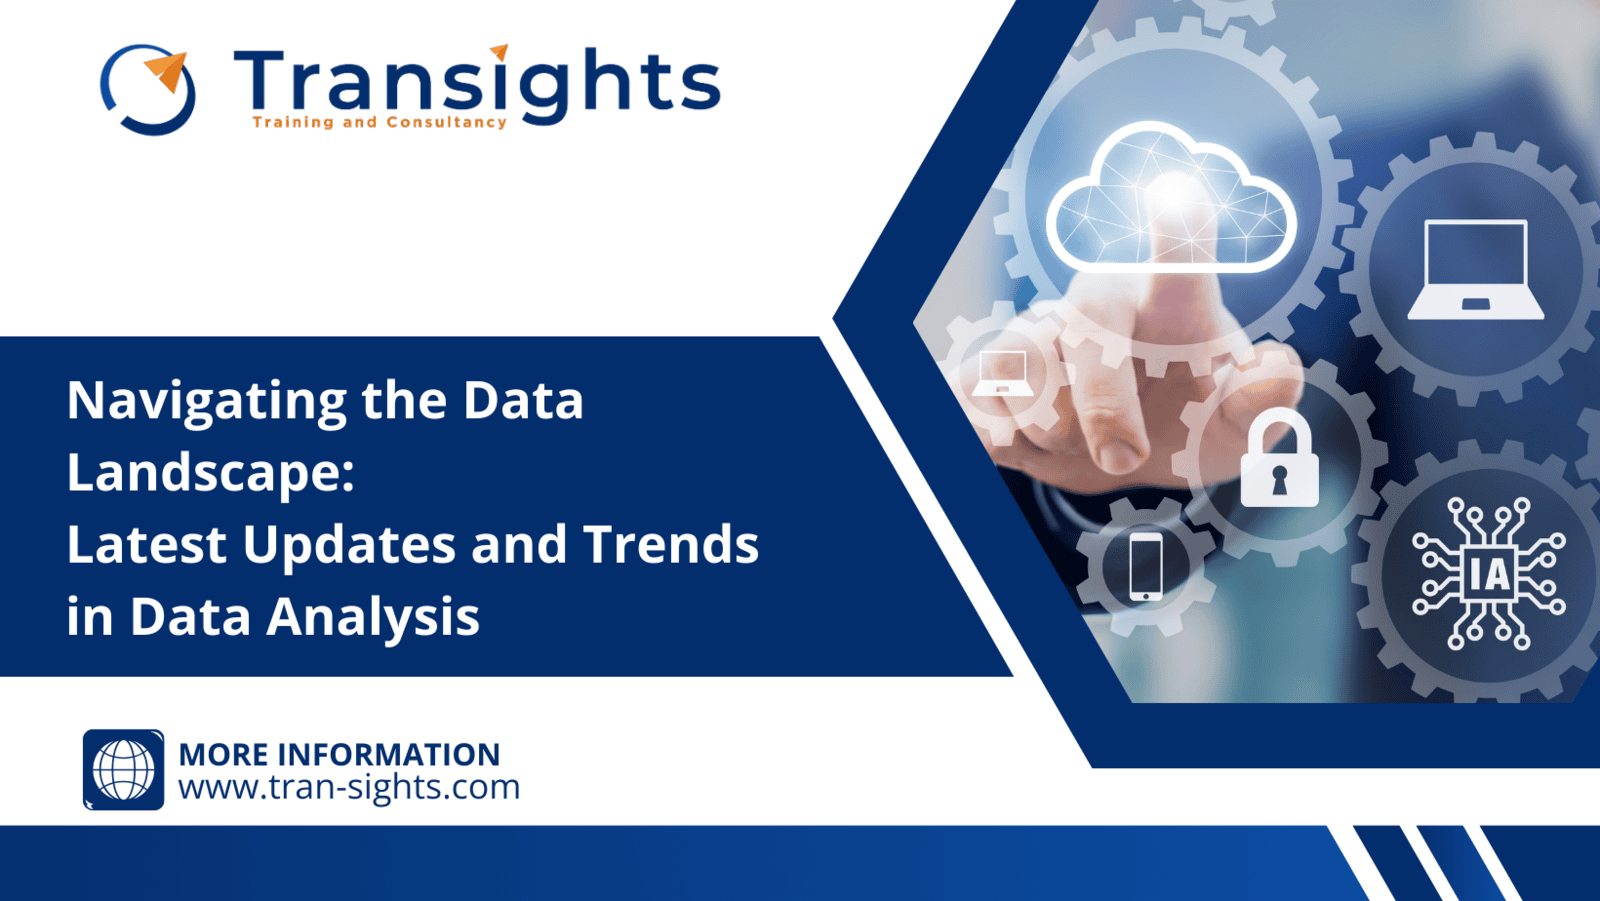 Navigating the Data Landscape: Latest Updates and Trends in Data Analysis